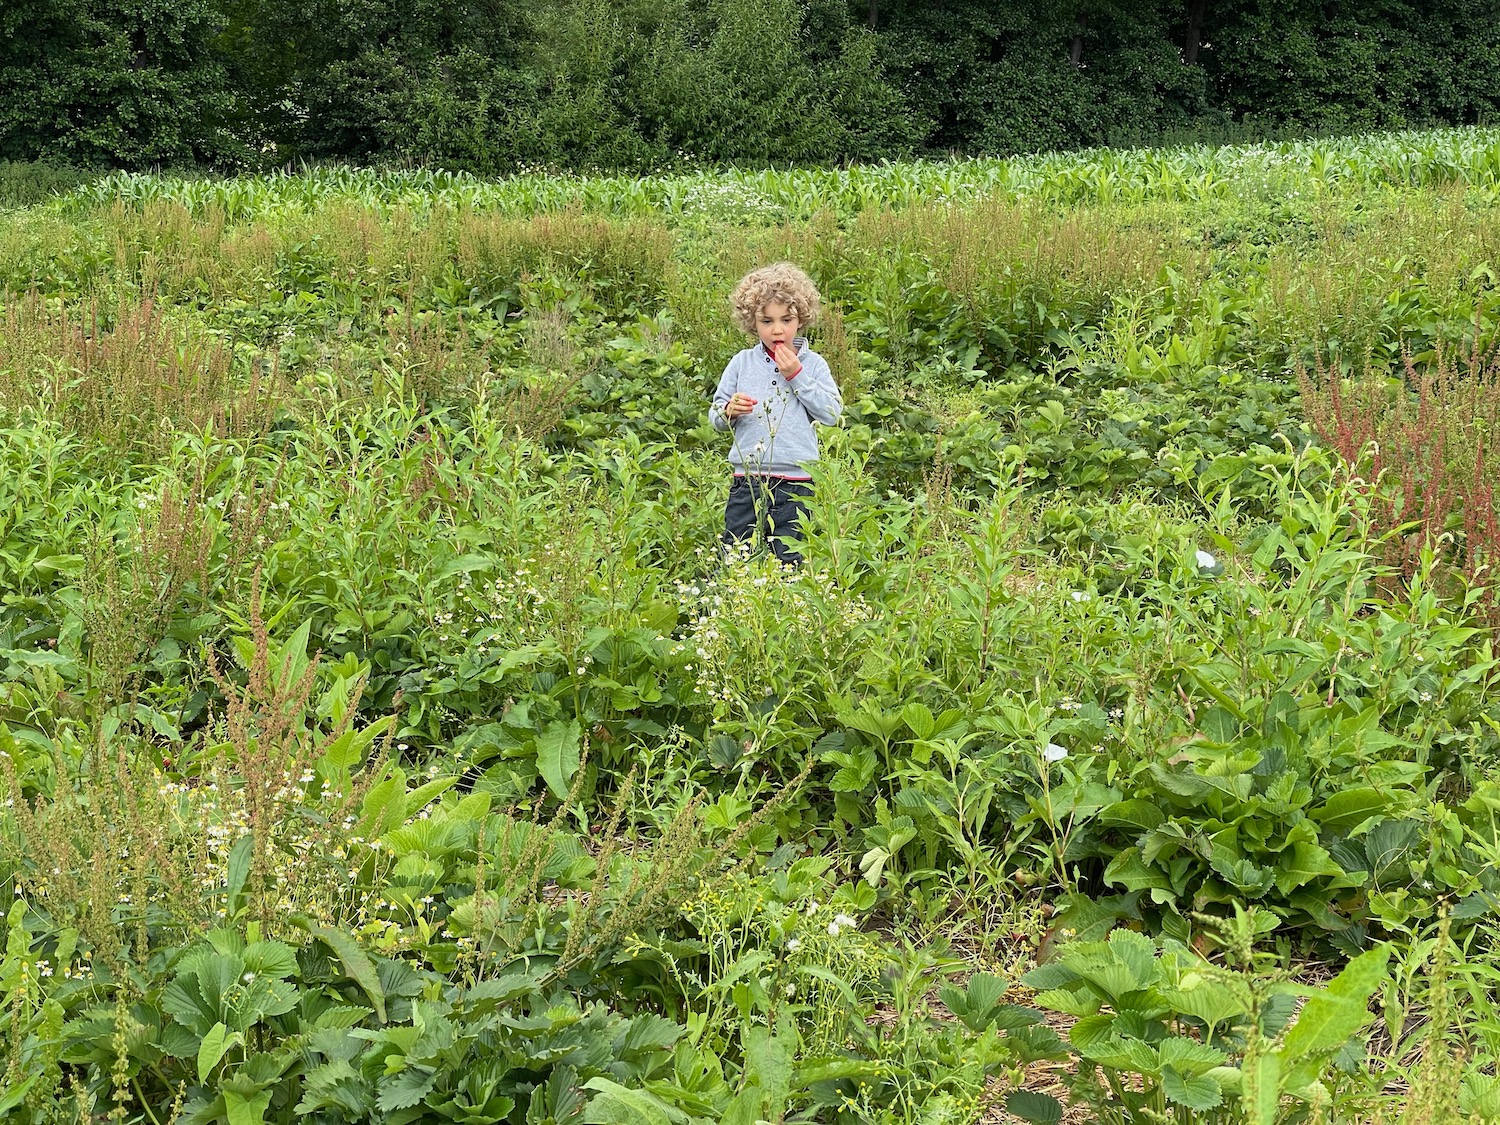 a child standing in a field of plants